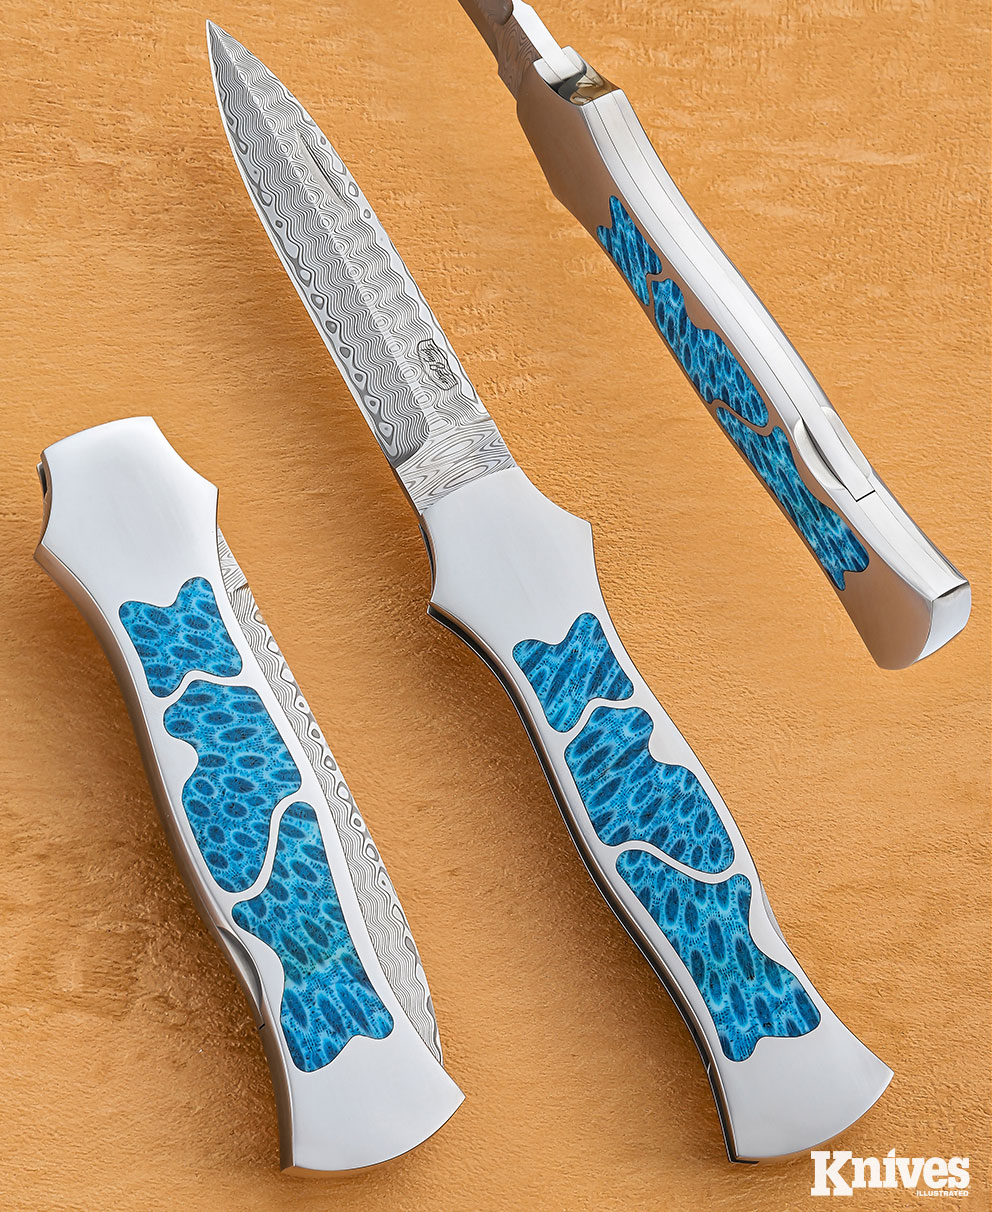 Tony Baker demonstrates excellent fit on curved blue coral inlays on this inter-frame folder.